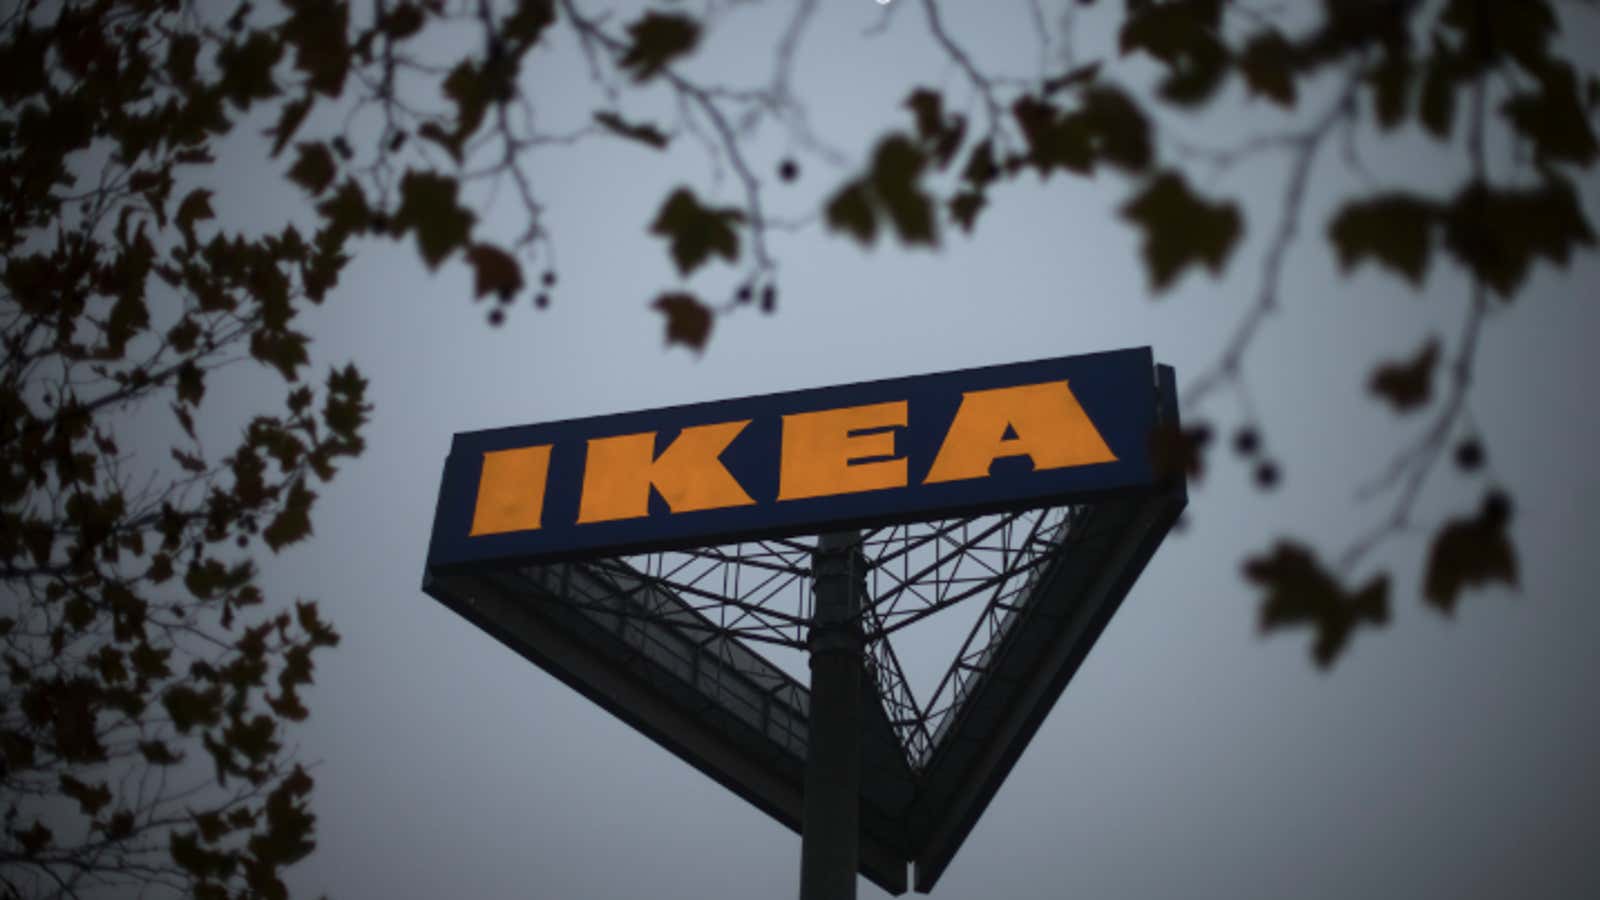 Ikea finds that European stores, like this one in Germany, are getting harder to set up fast.